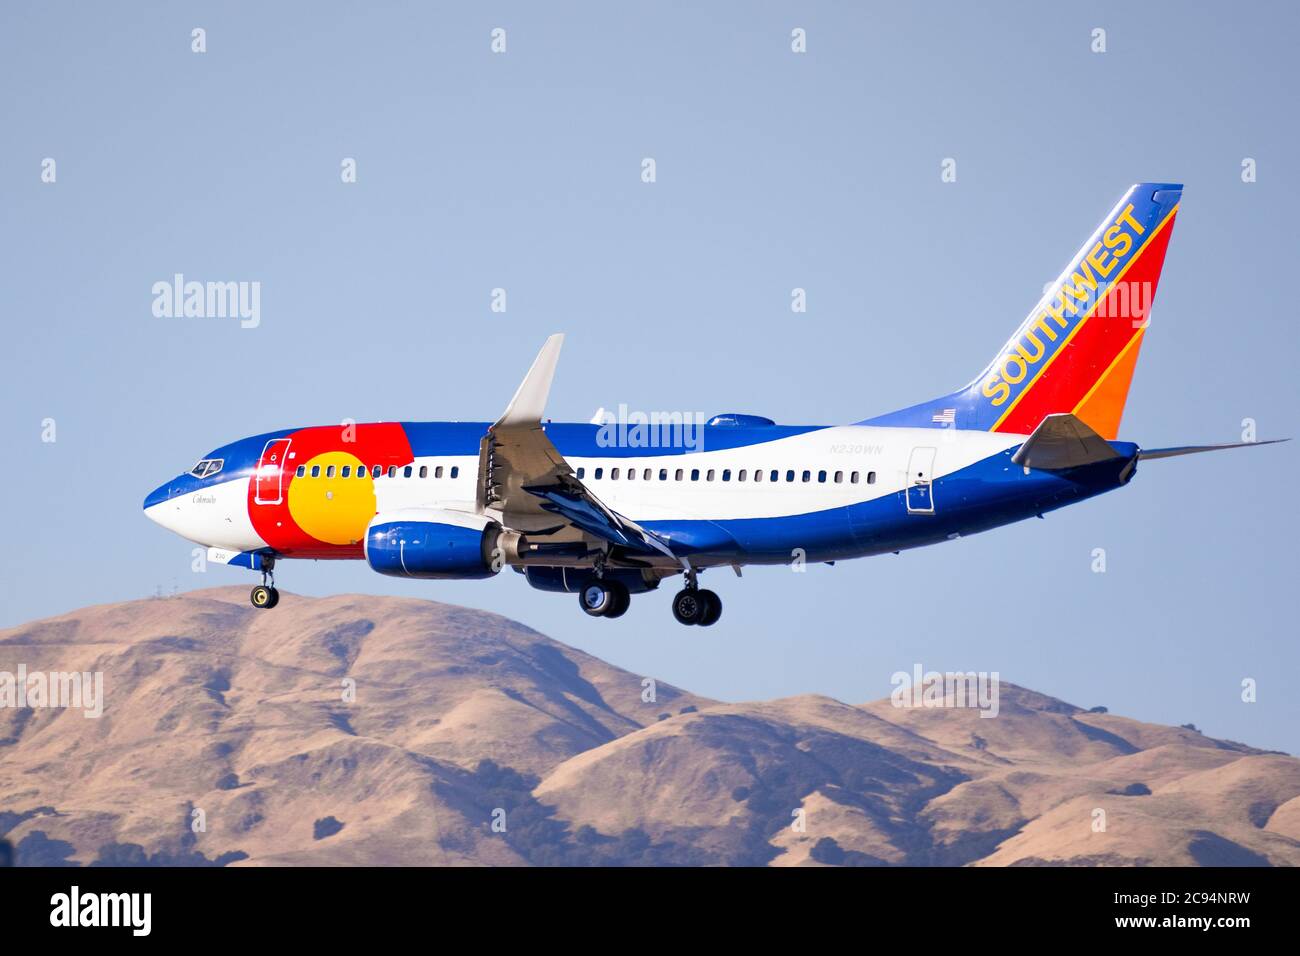 July 22, 2020 San Jose / CA / USA - Colorado One Southwest Airlines landing at San Jose International Airport (SJC); Colorado One livery is honoring a Stock Photo